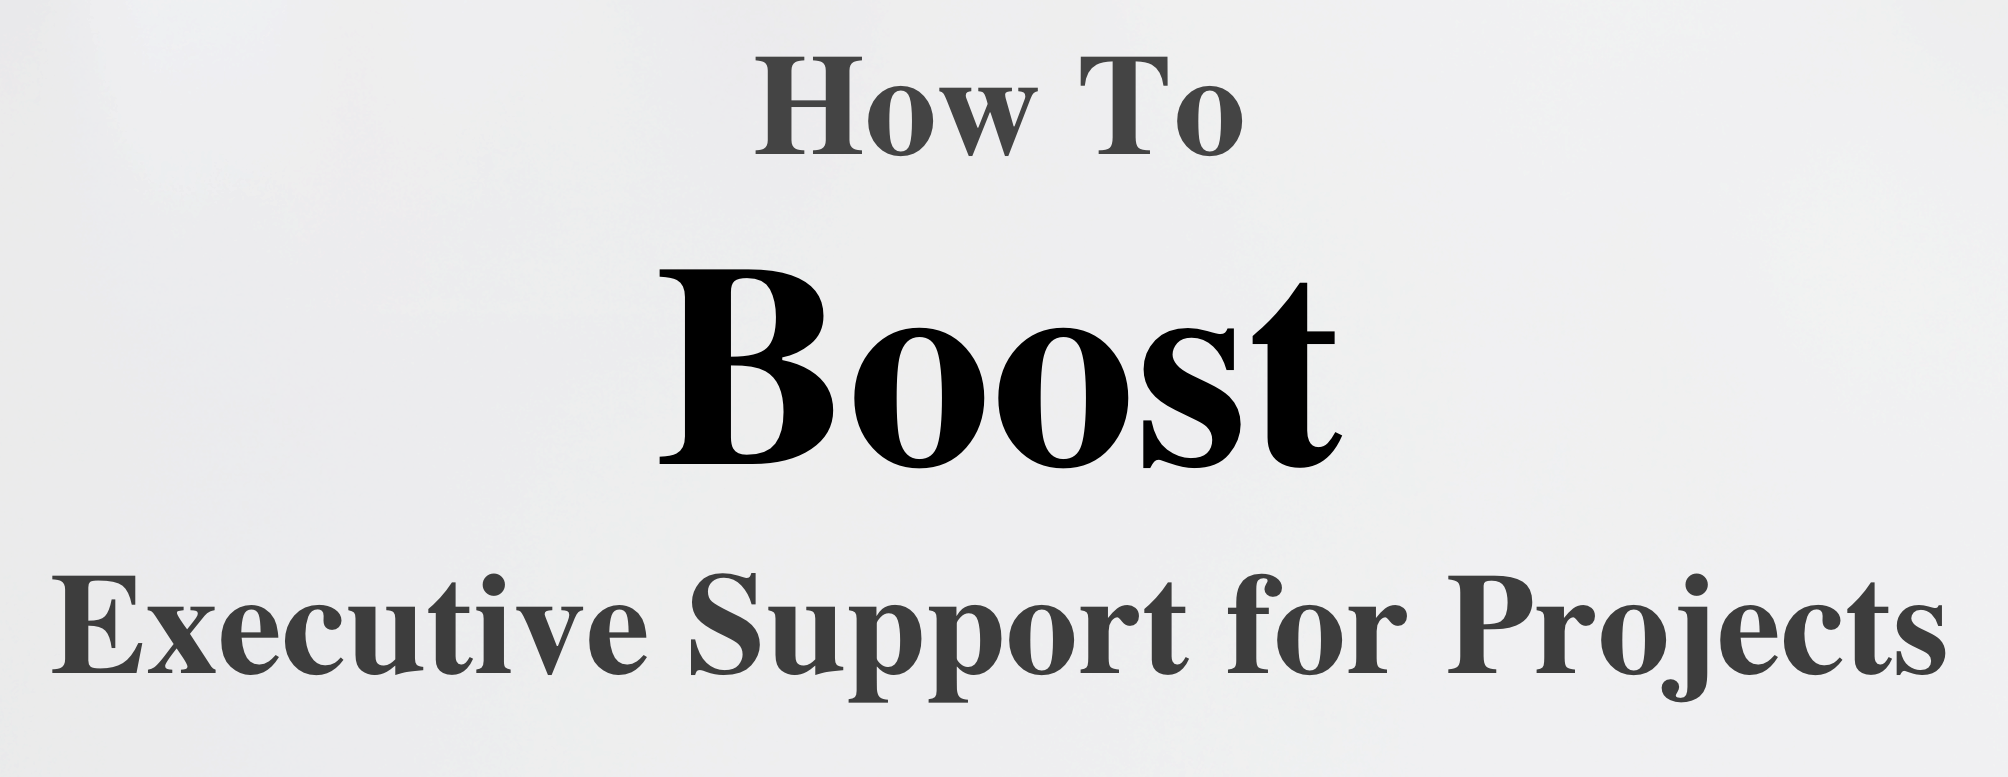 How To Boost Executive Support for Projects